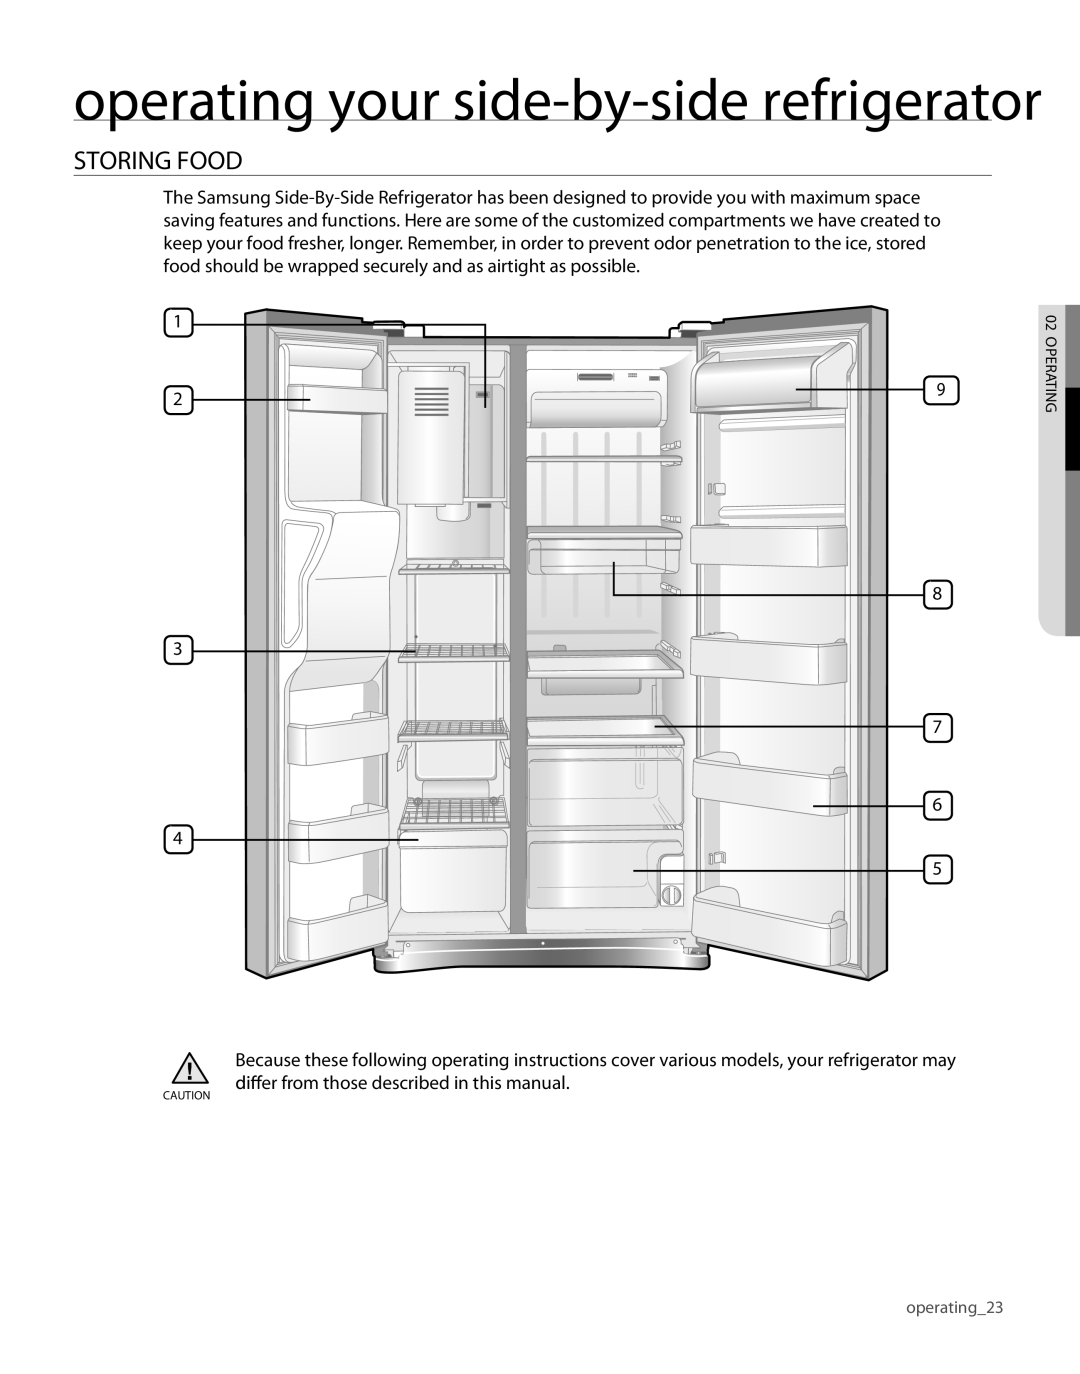 Samsung RS261MDRS, RS261MDBP, RS261MDWP, RS261MDPN user manual Storing Food, operating your side-by-side refrigerator 